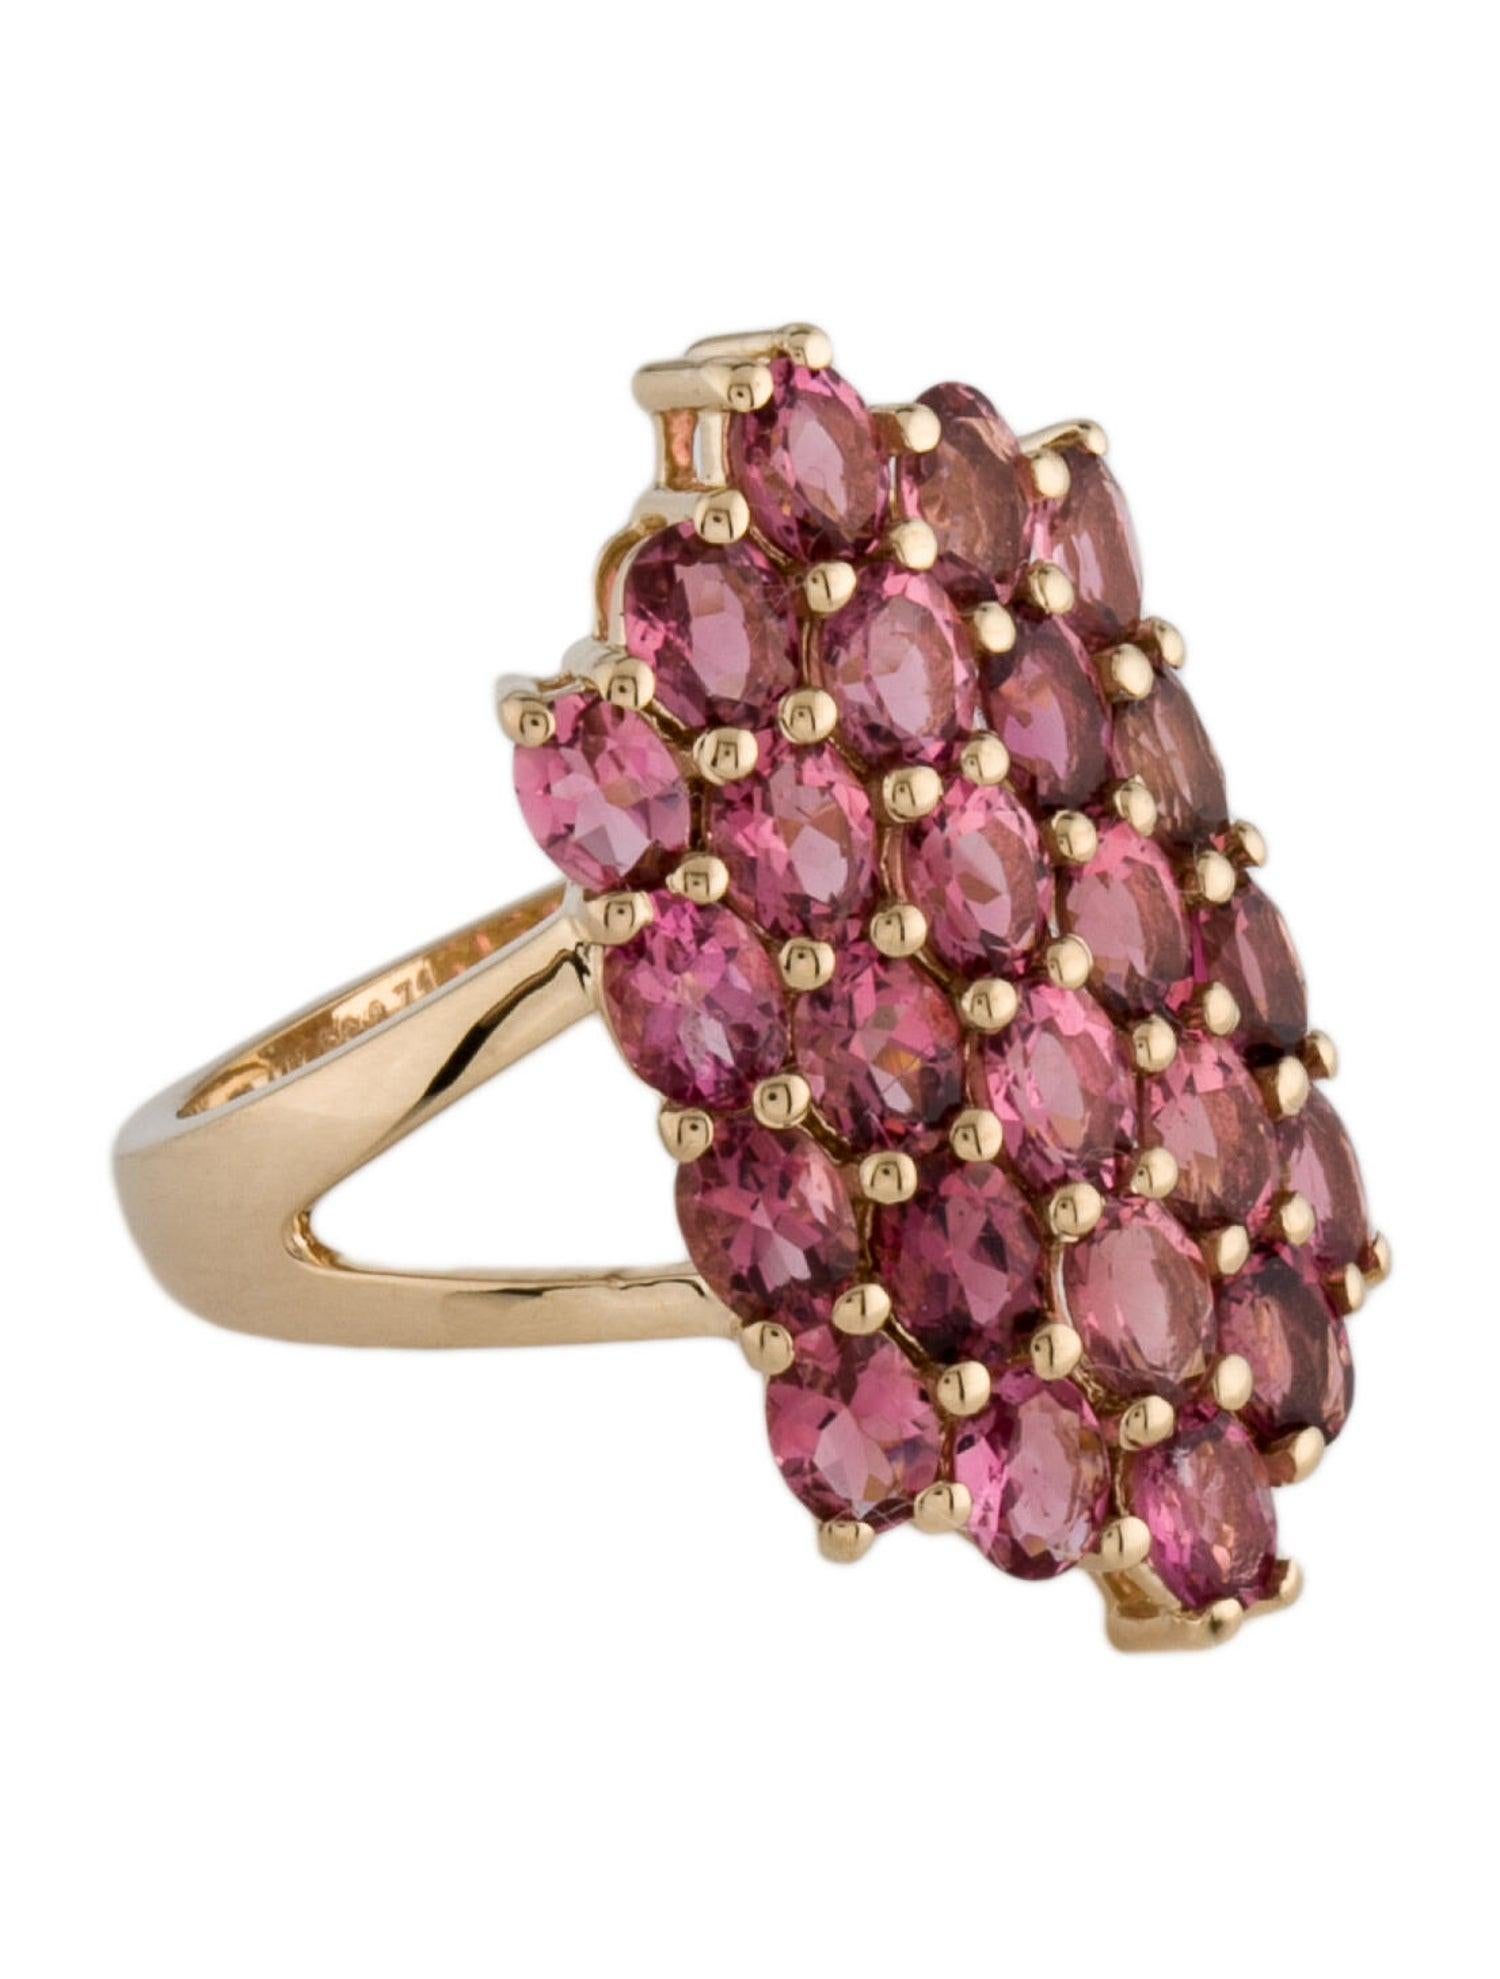 Embark on a journey through the mesmerizing hues of nature with our Rainbow Gemstone Radiance Pink Tourmaline Oval Ring. Crafted with precision and passion by Jeweltique, this exquisite ring is a celebration of the enchanting beauty found in